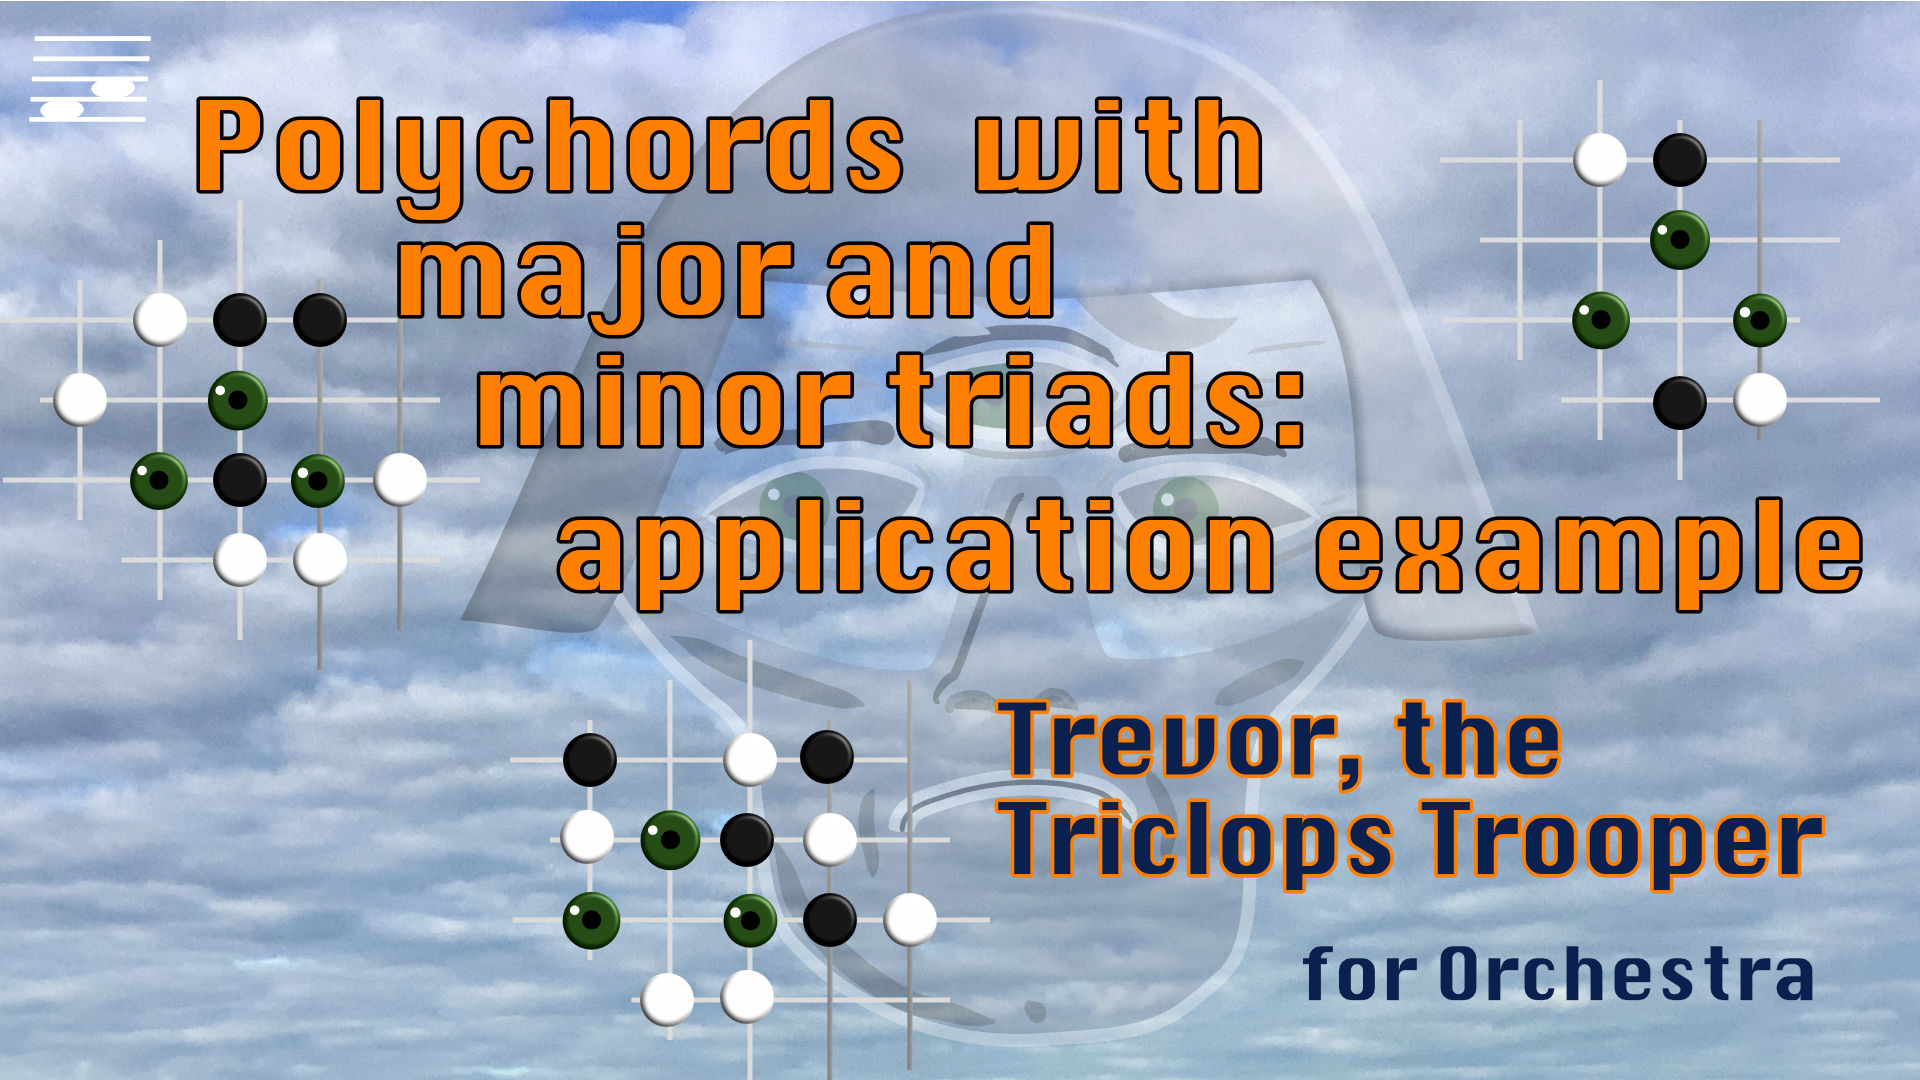 YouTube thumbnail for the Polychords with Major and Minor Triads: Application Example video tutorial video tutorial